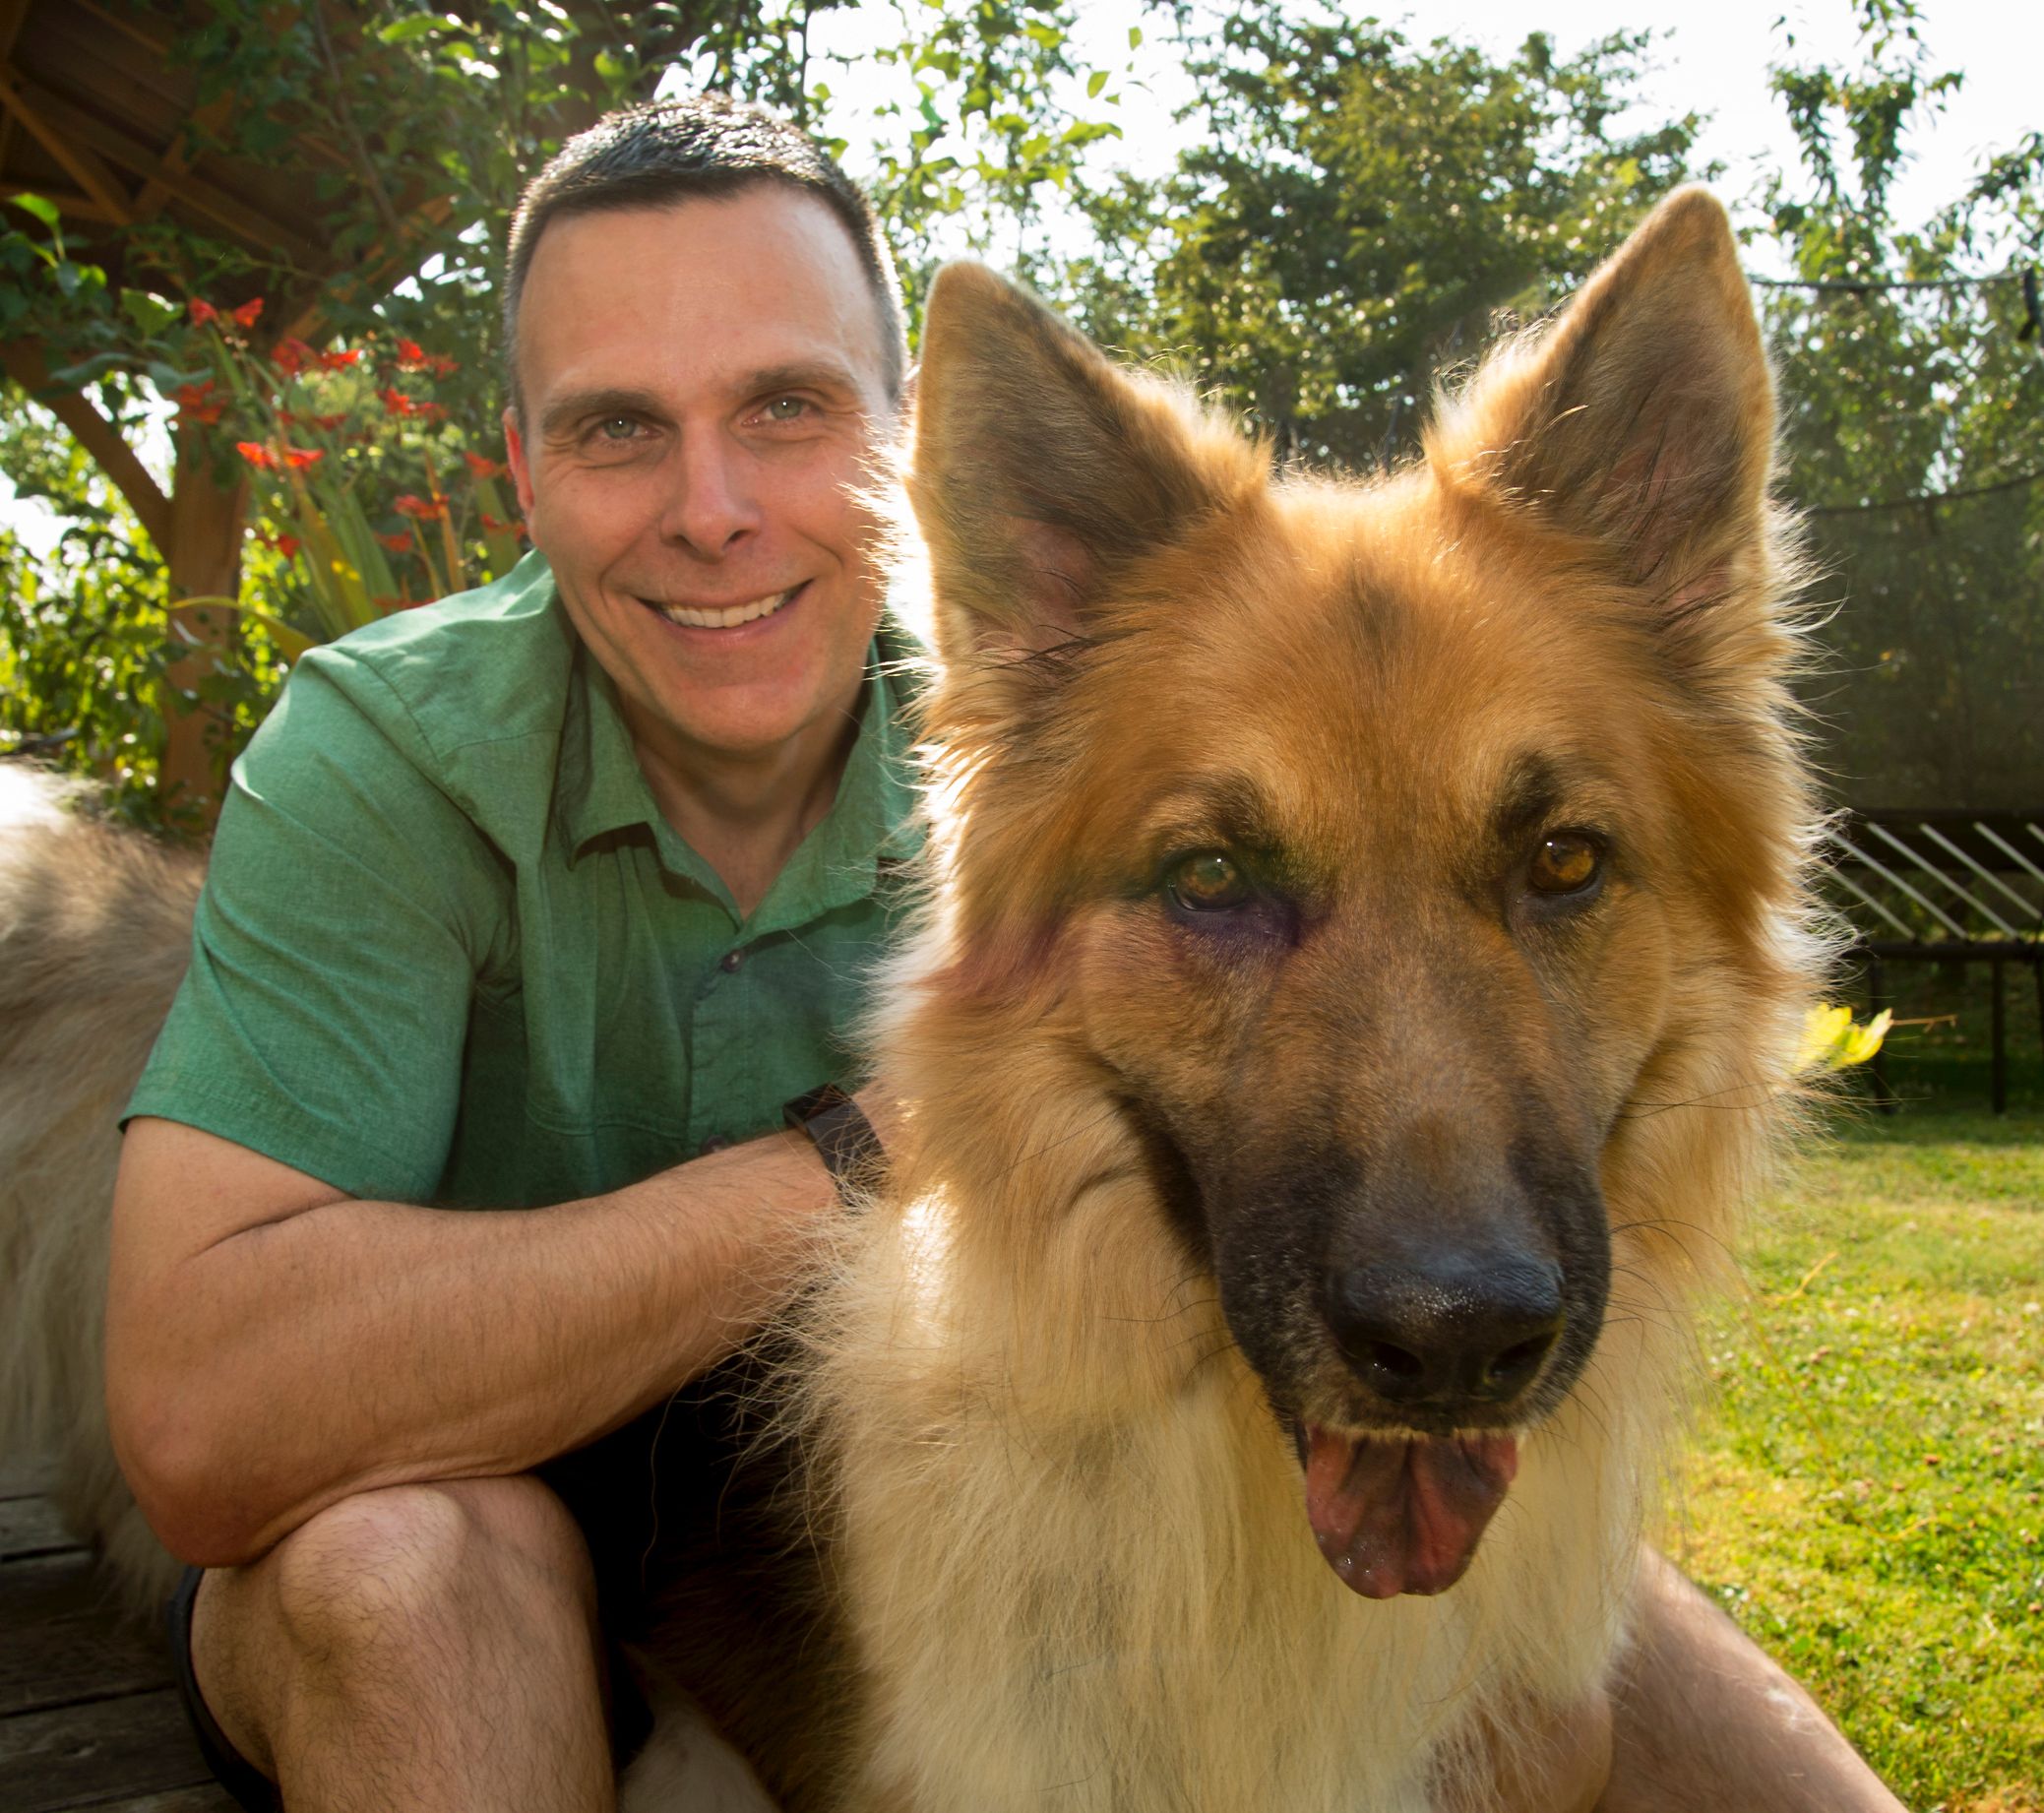 HALO Director Matt Kaeberlein highlights the start of expanded rapamycin clinical trials for dog longevity in interview by Longevity Technology